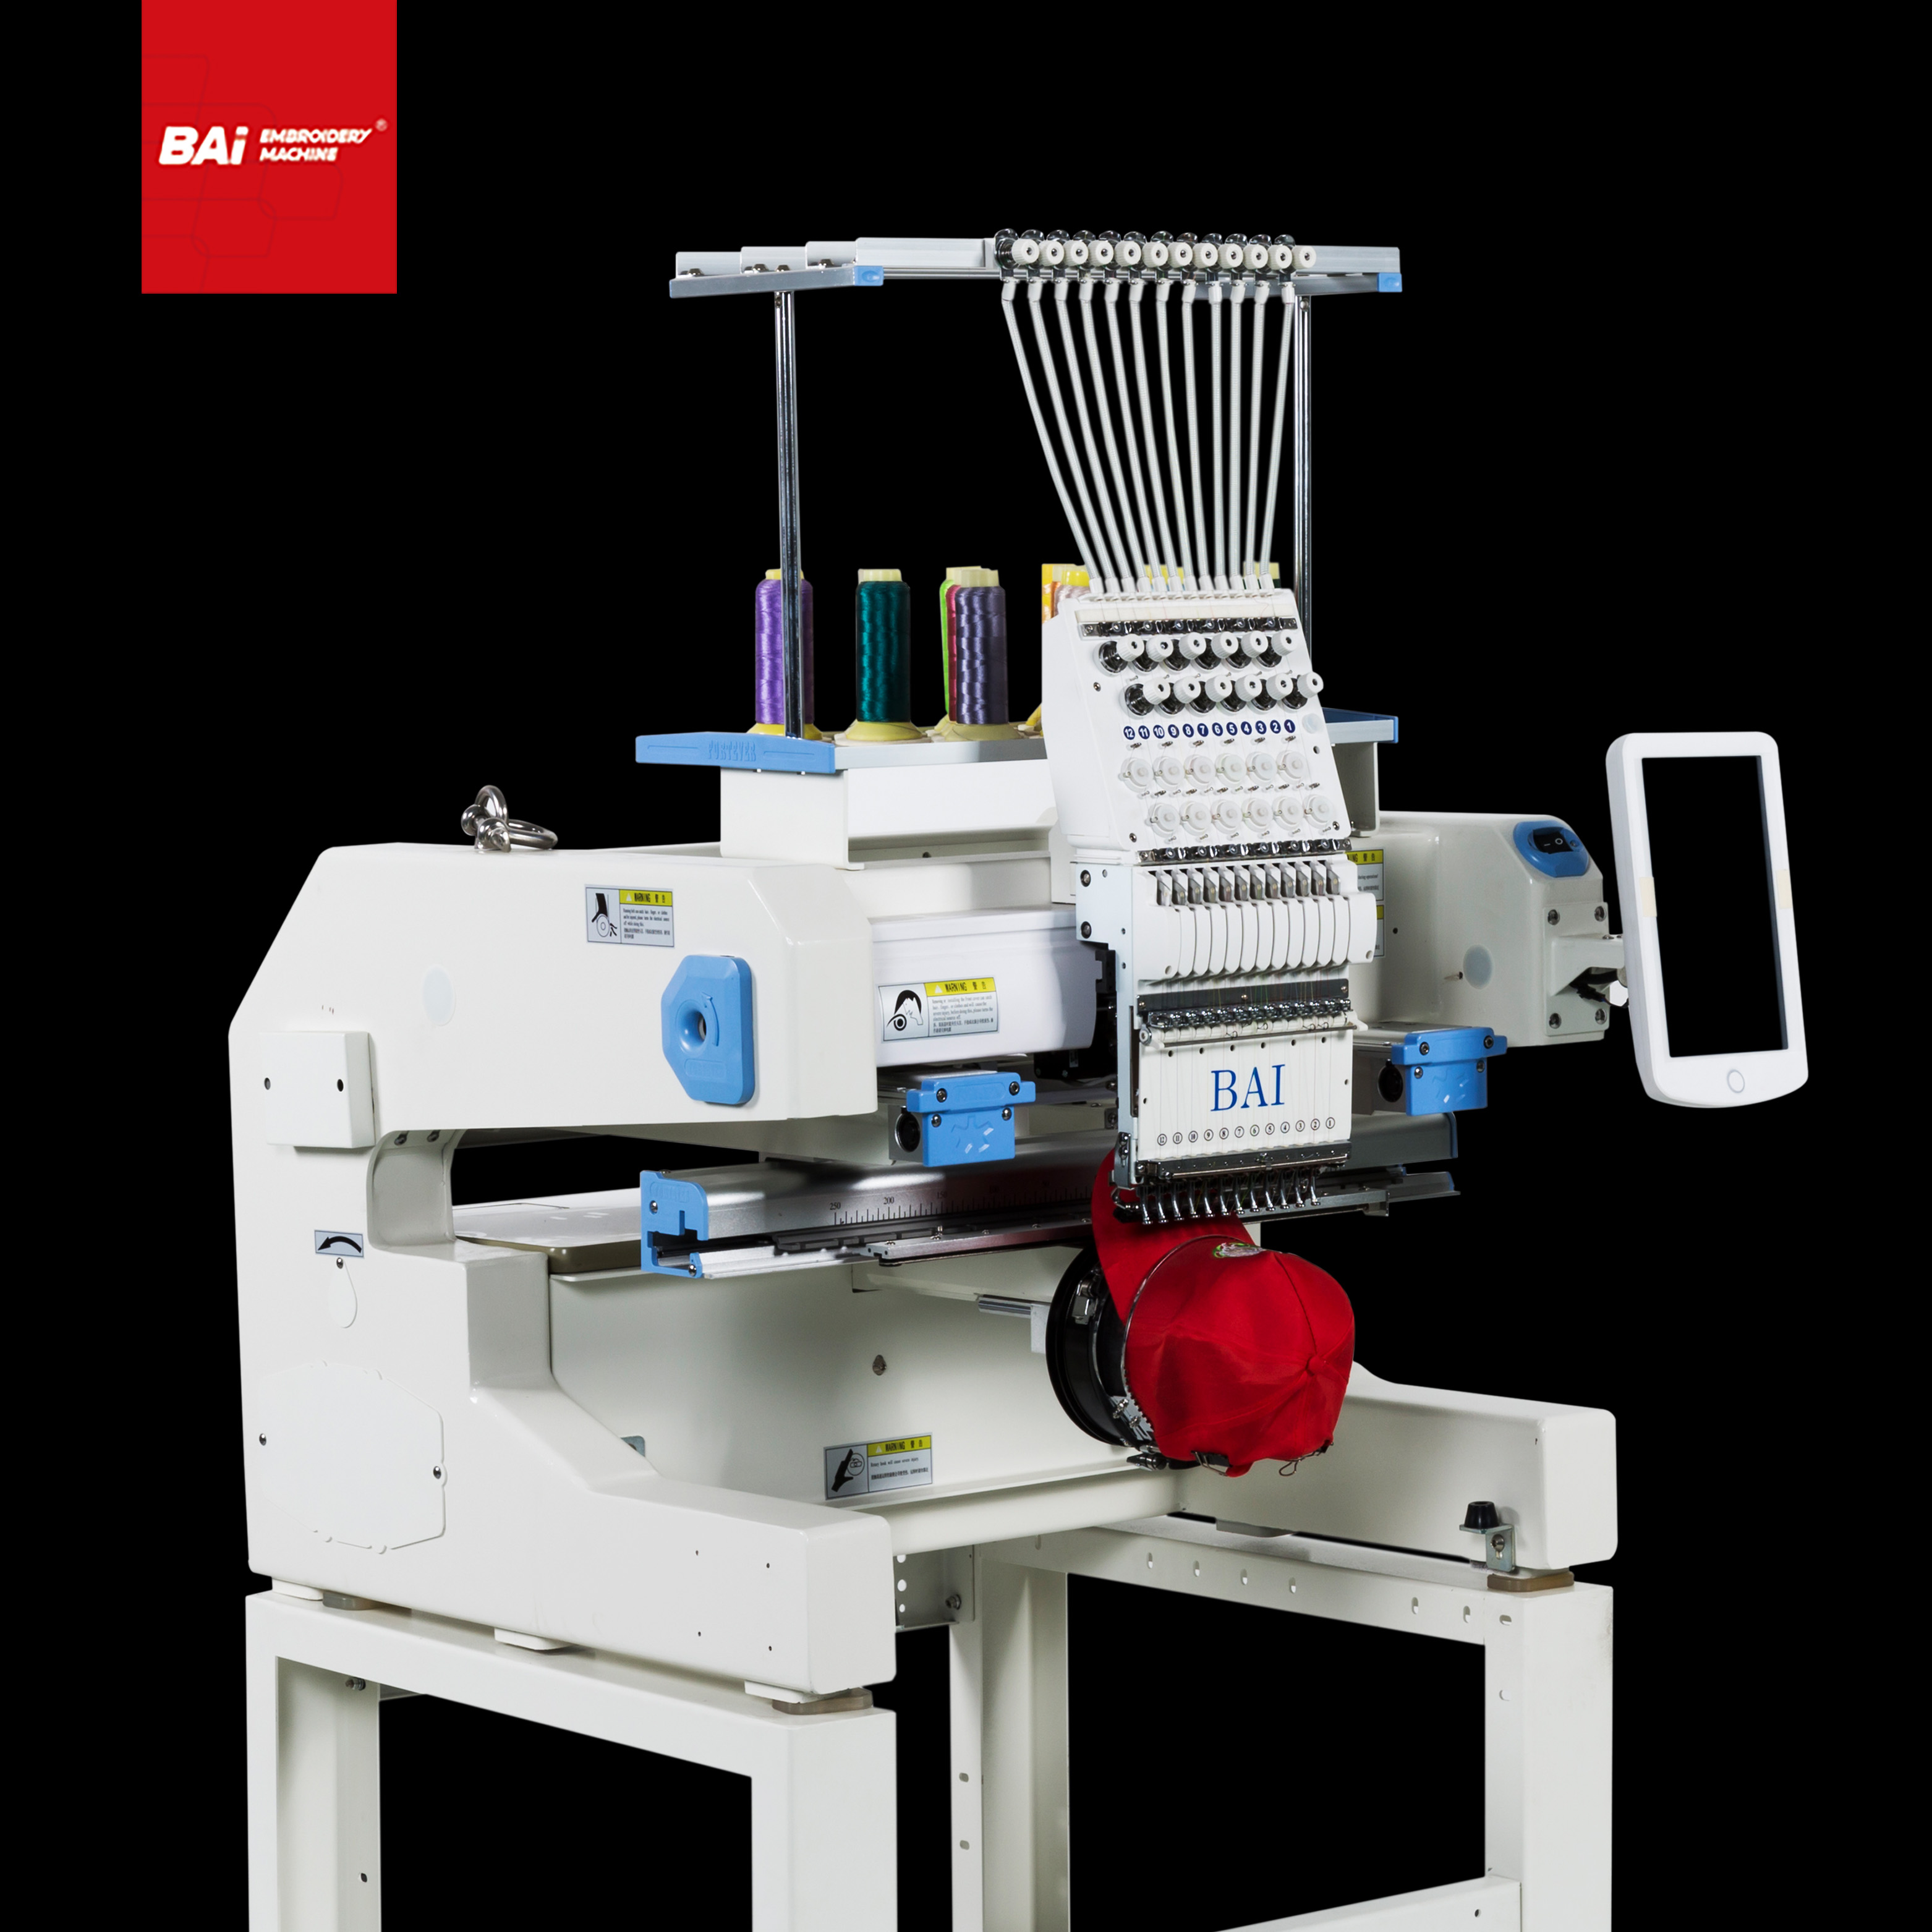 BAI Best Quality Embroidery Machine for Household with Embroidery Machine Price